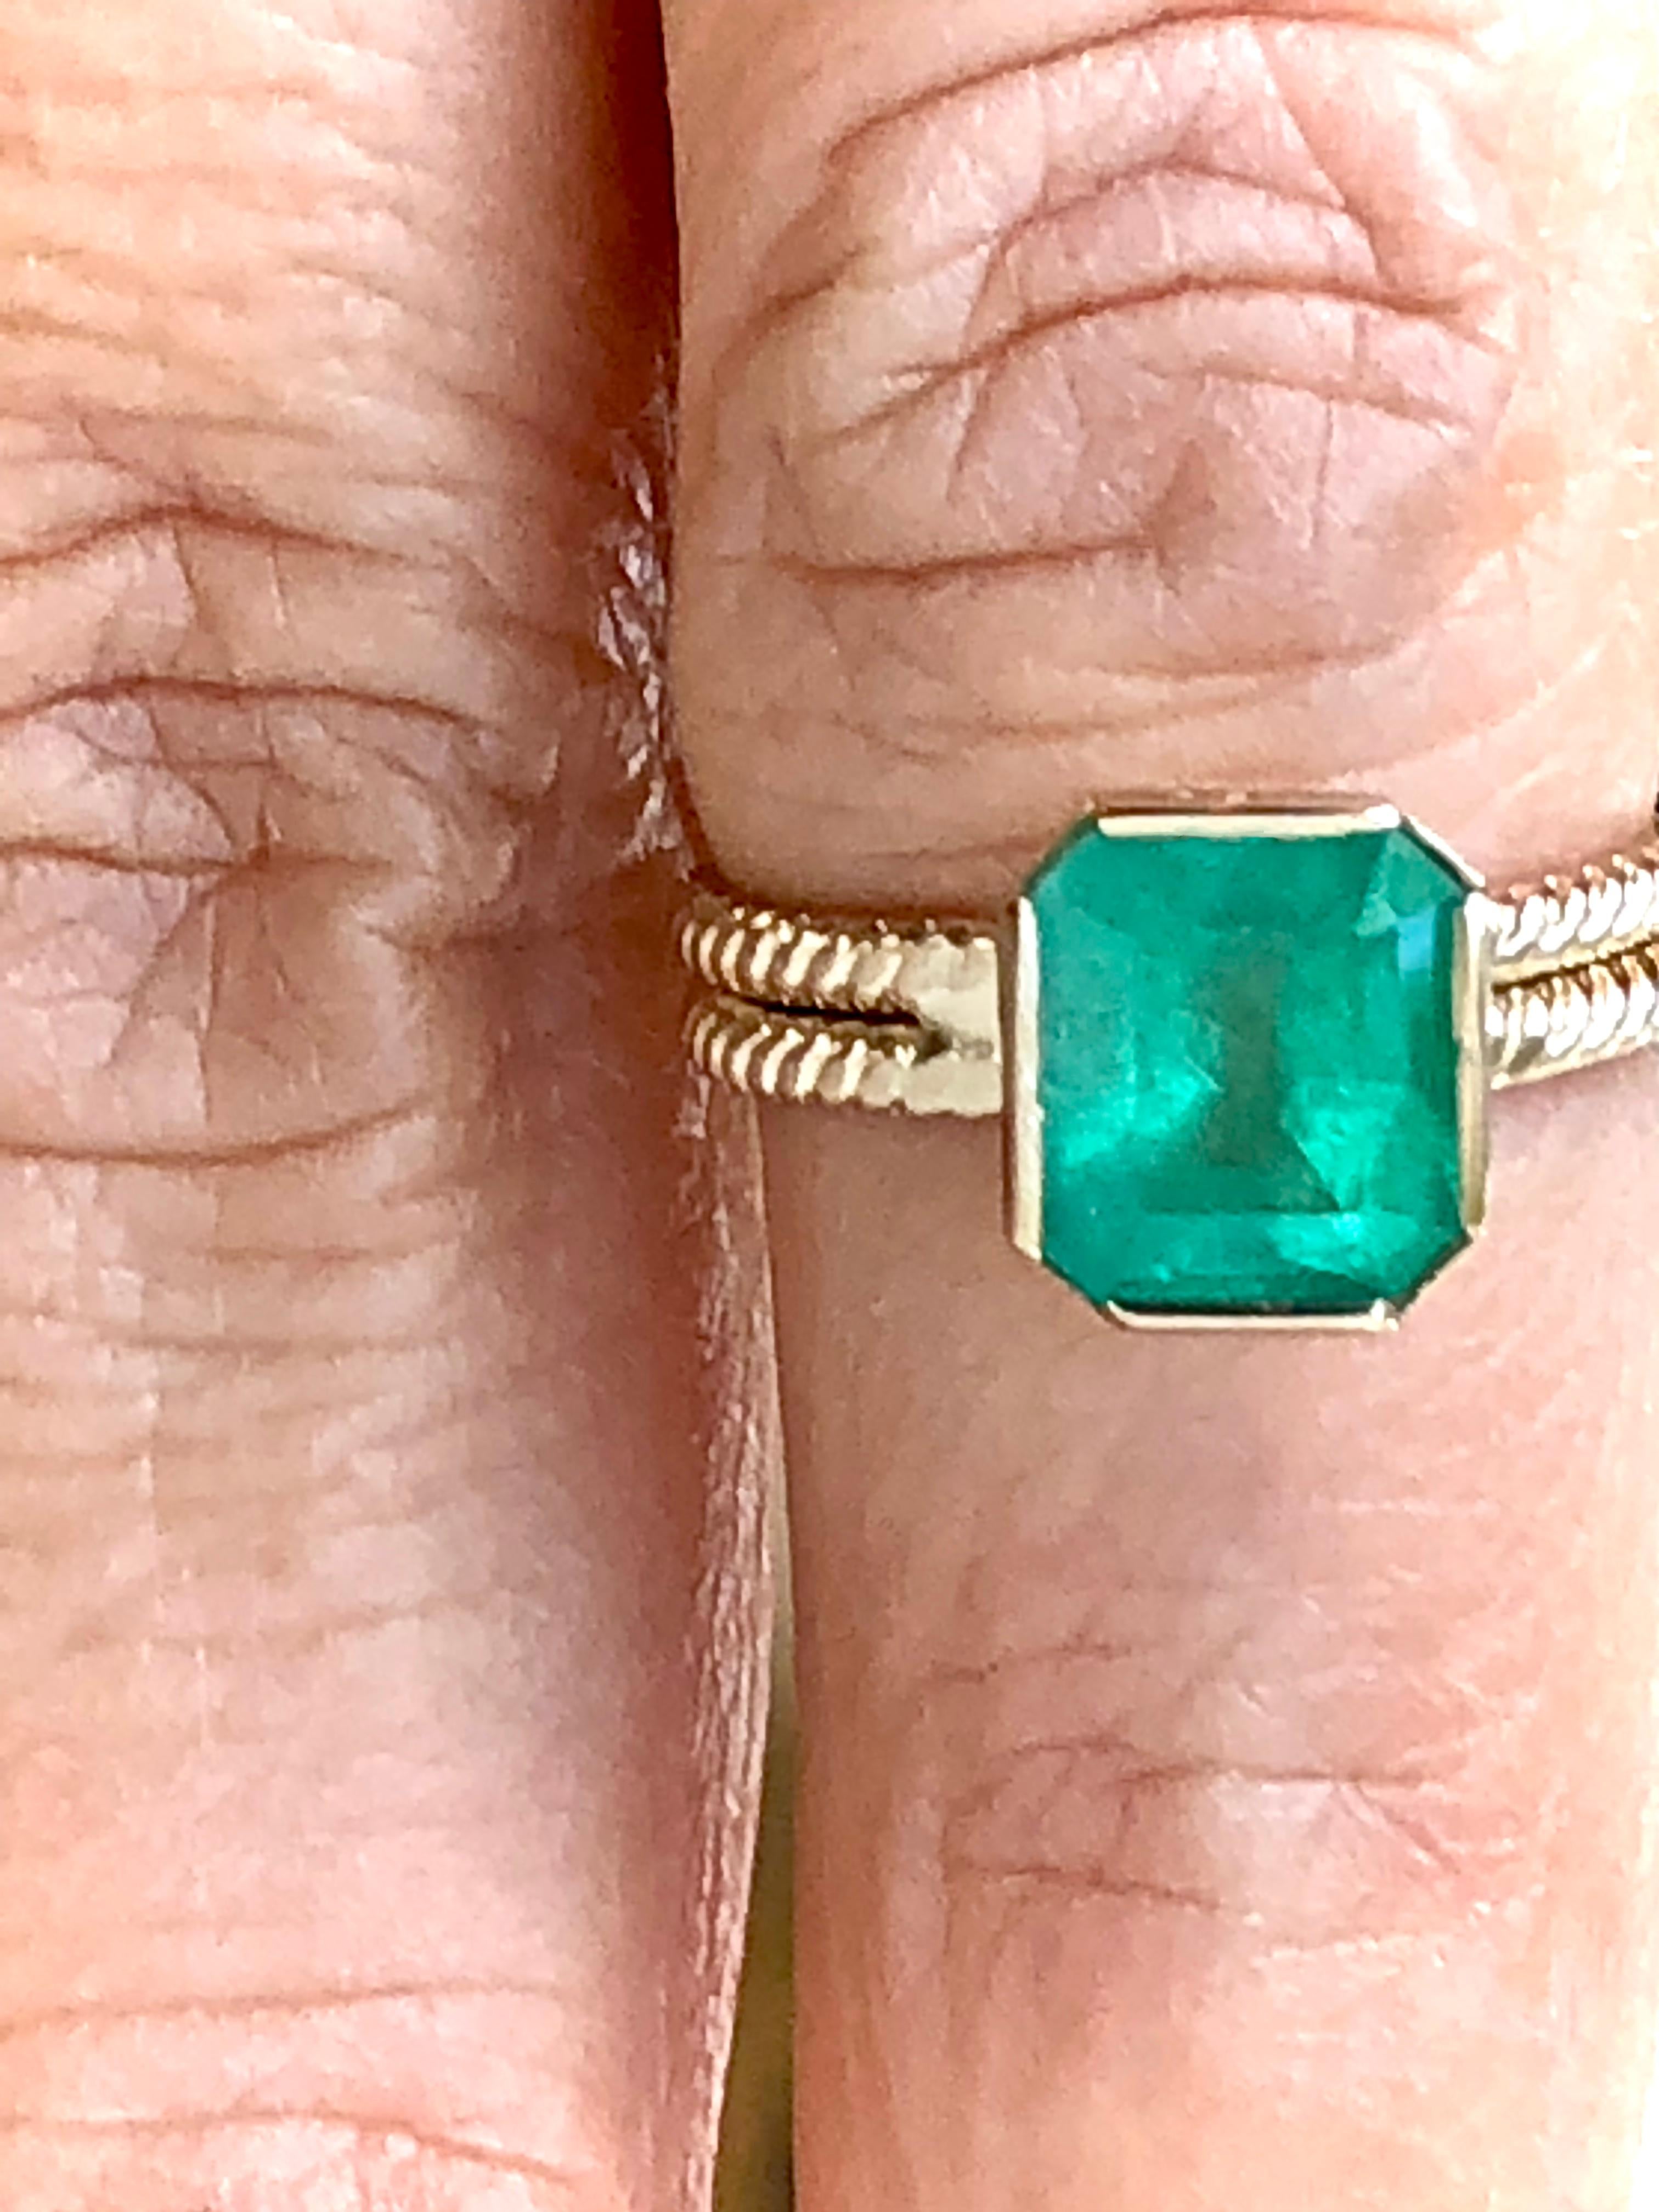 Natural Colombian Emerald emerald cut vintage solitaire ring 14 K yellow gold 
Emerald approx. weight 2.40 carats, the emerald measurements are 8.40mm x 7.42mm. Natural Medium Green, SI clarity.
Size: 6
Setting:  Semi-bezel 
Estate- Very Good